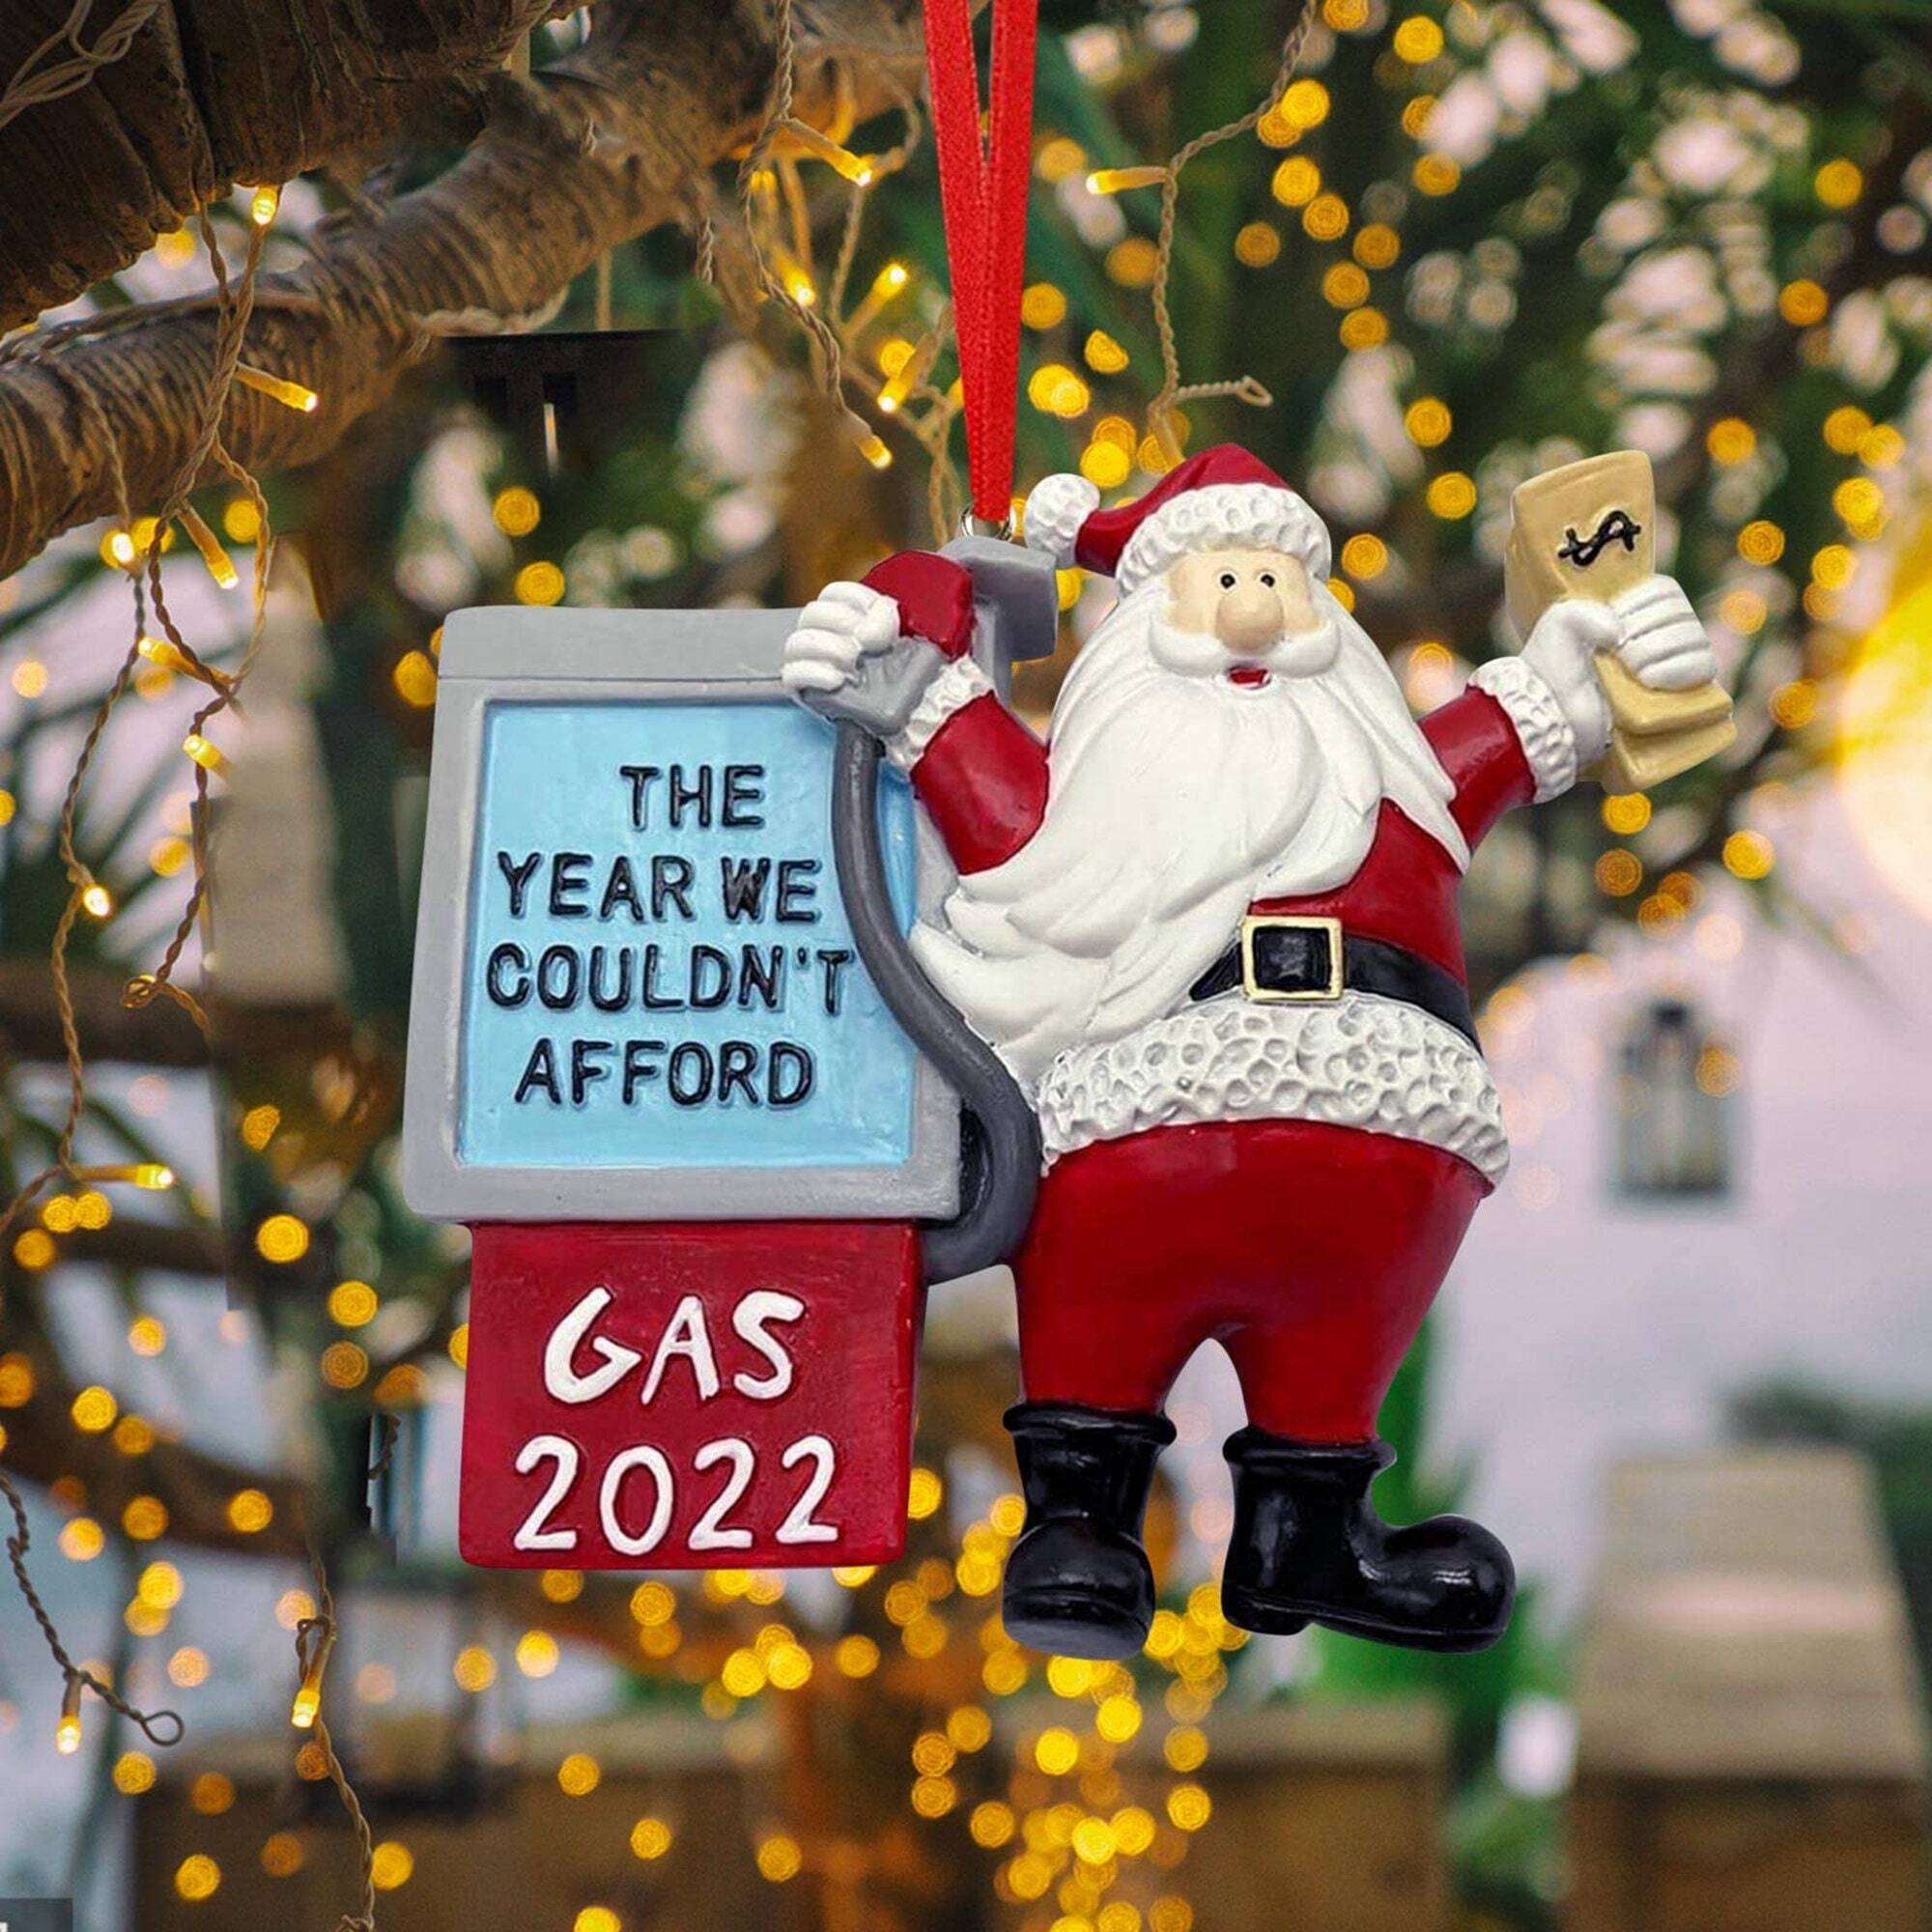 Hand Painted 2022 Santa Claus, 2022 Gas - The Year We Couldn't Afford